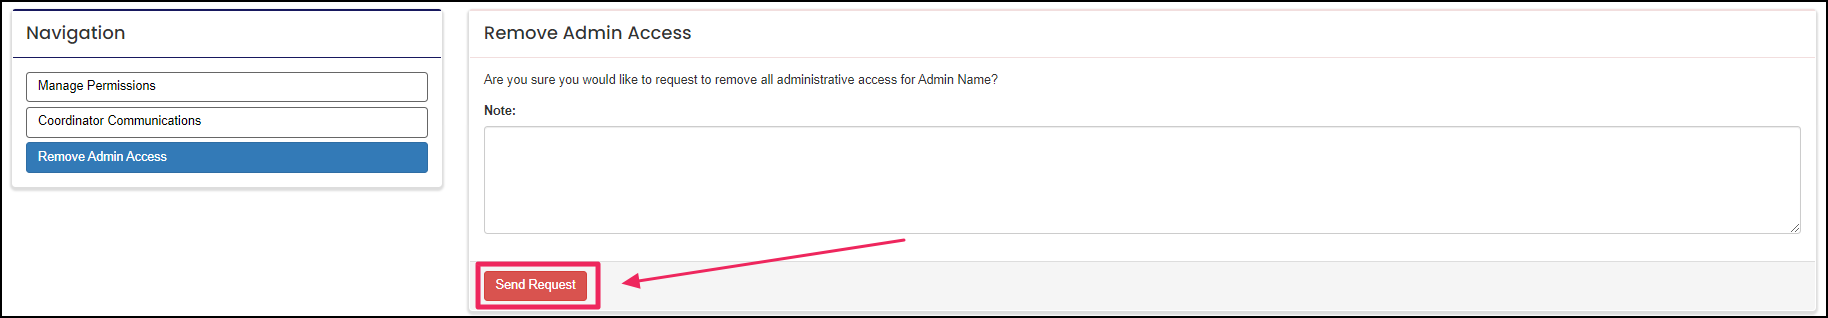 Image shows remove admin page highlighting send request button.